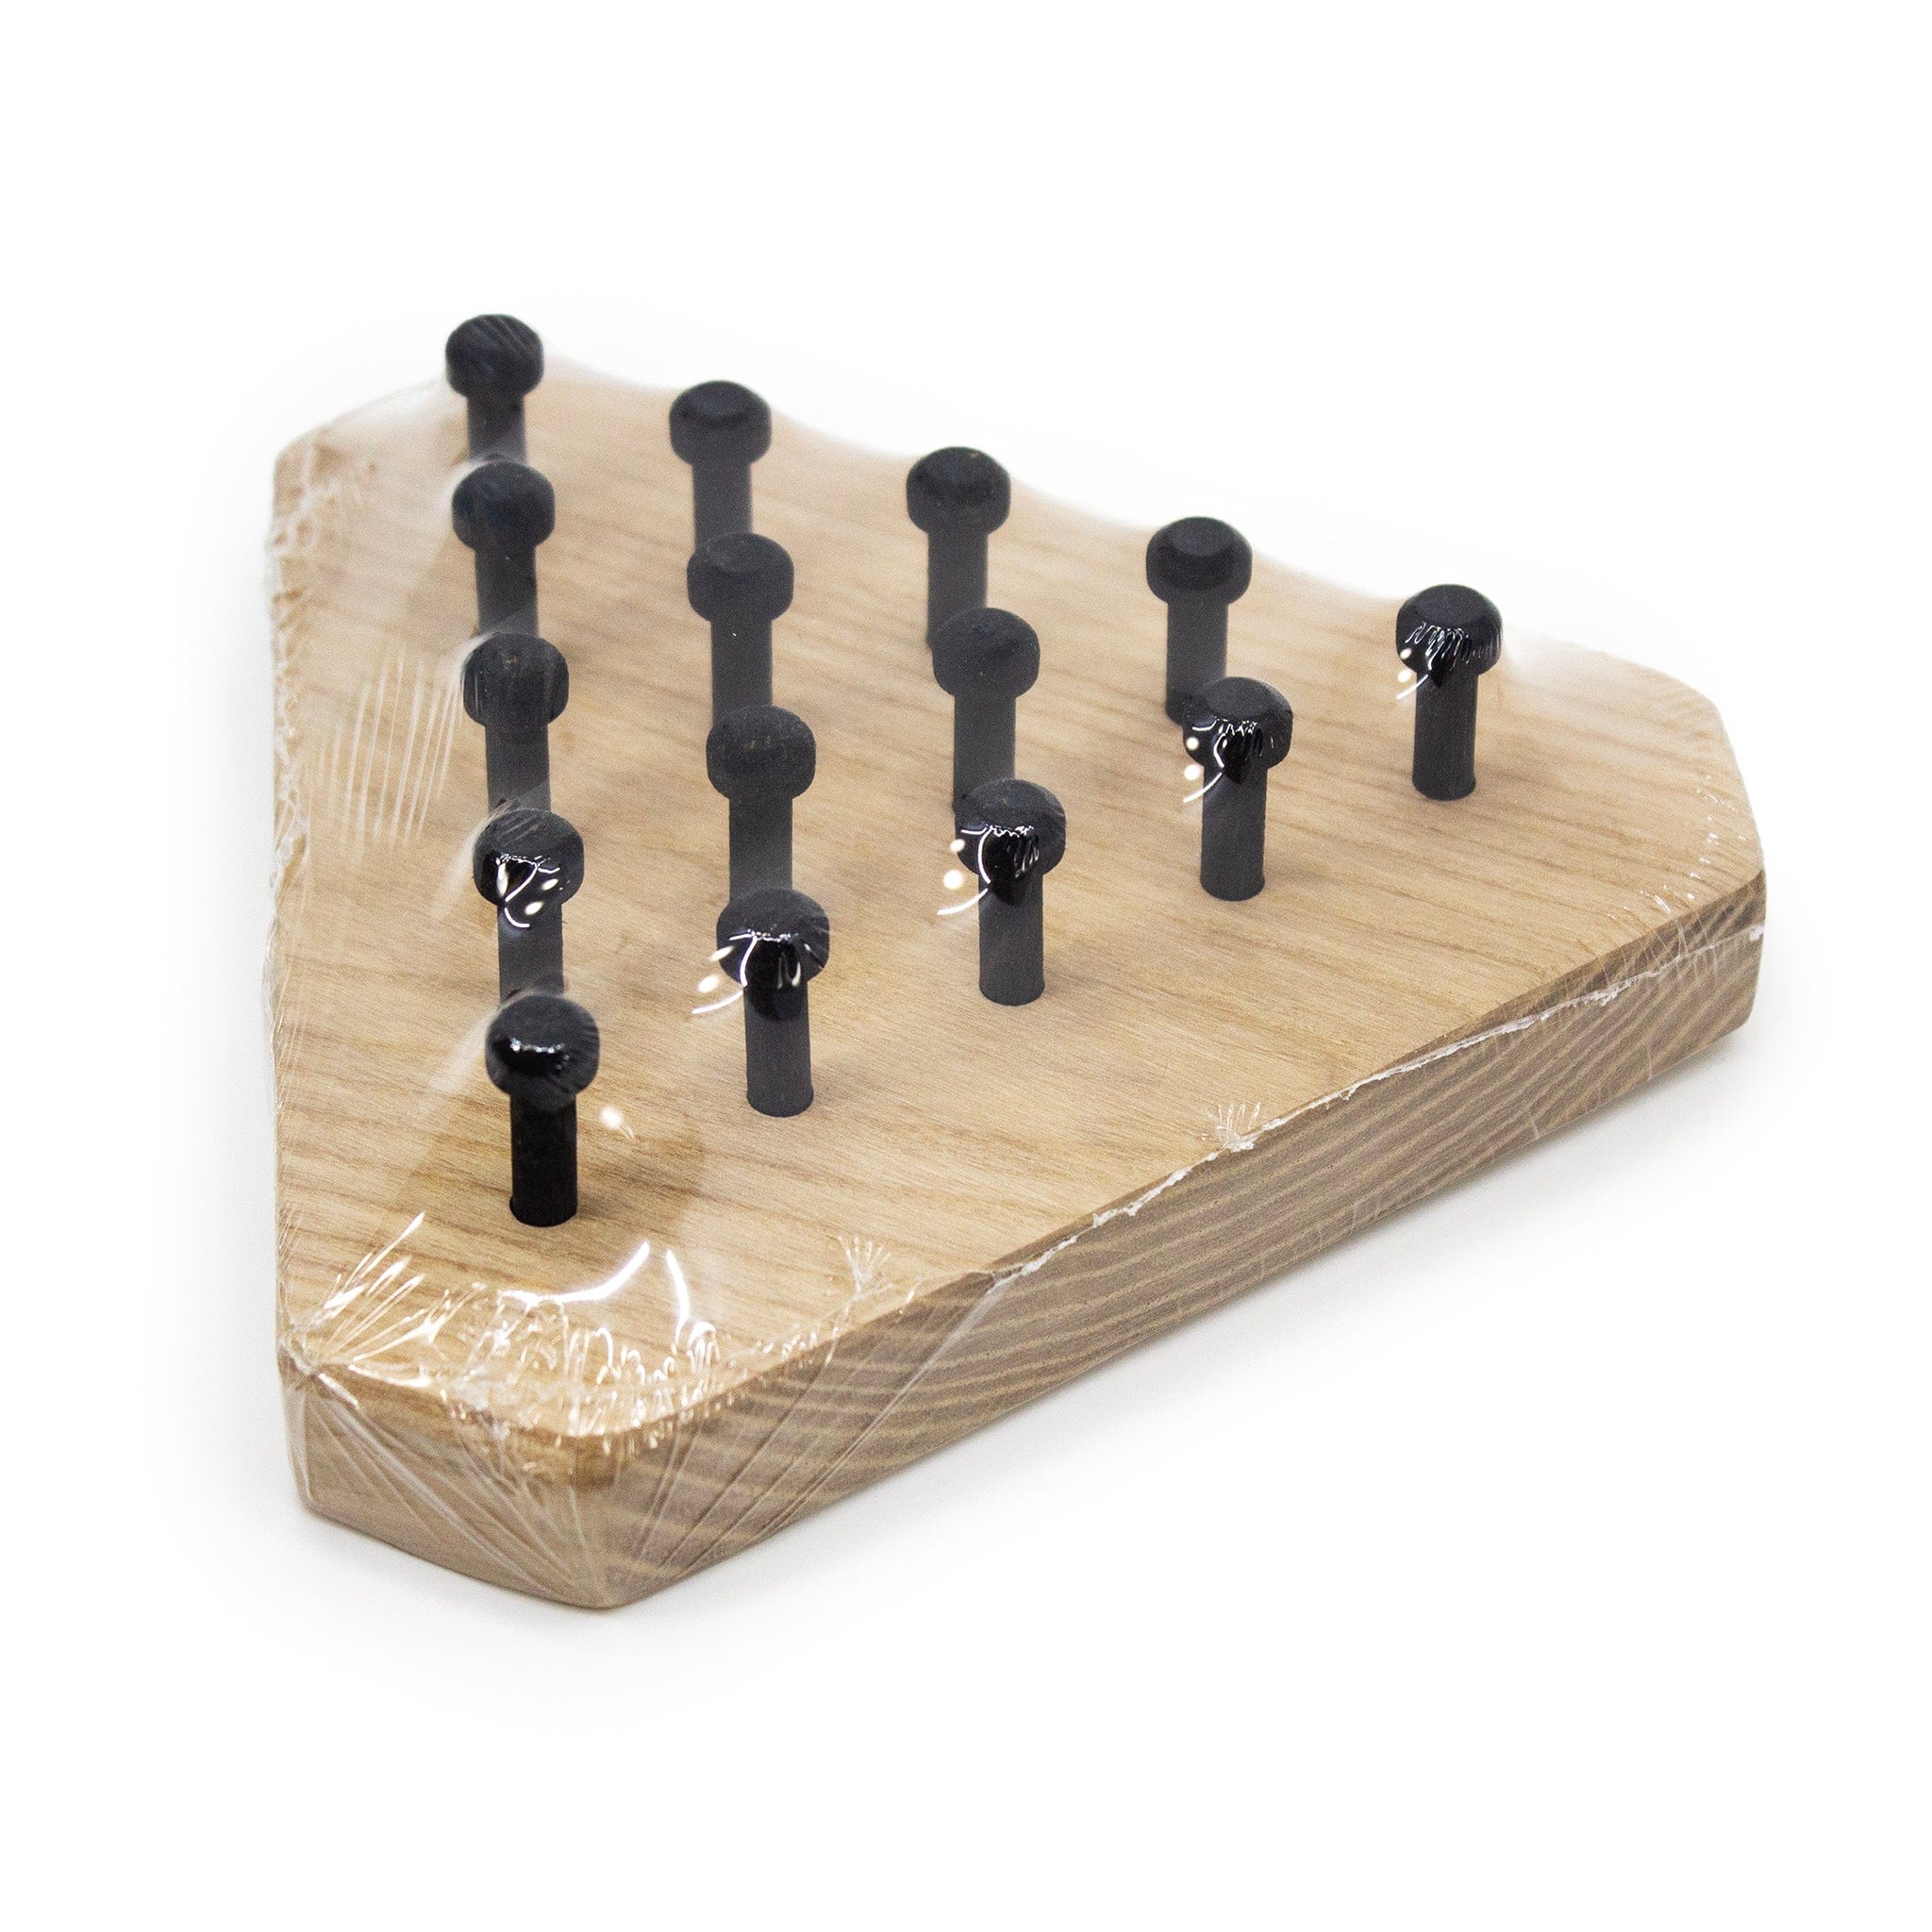 Classic Peg Elimination Game Elimination game | wooden games | peg game | wooden solitaire | cracker | Maker of Lunenburg | Made in Canada